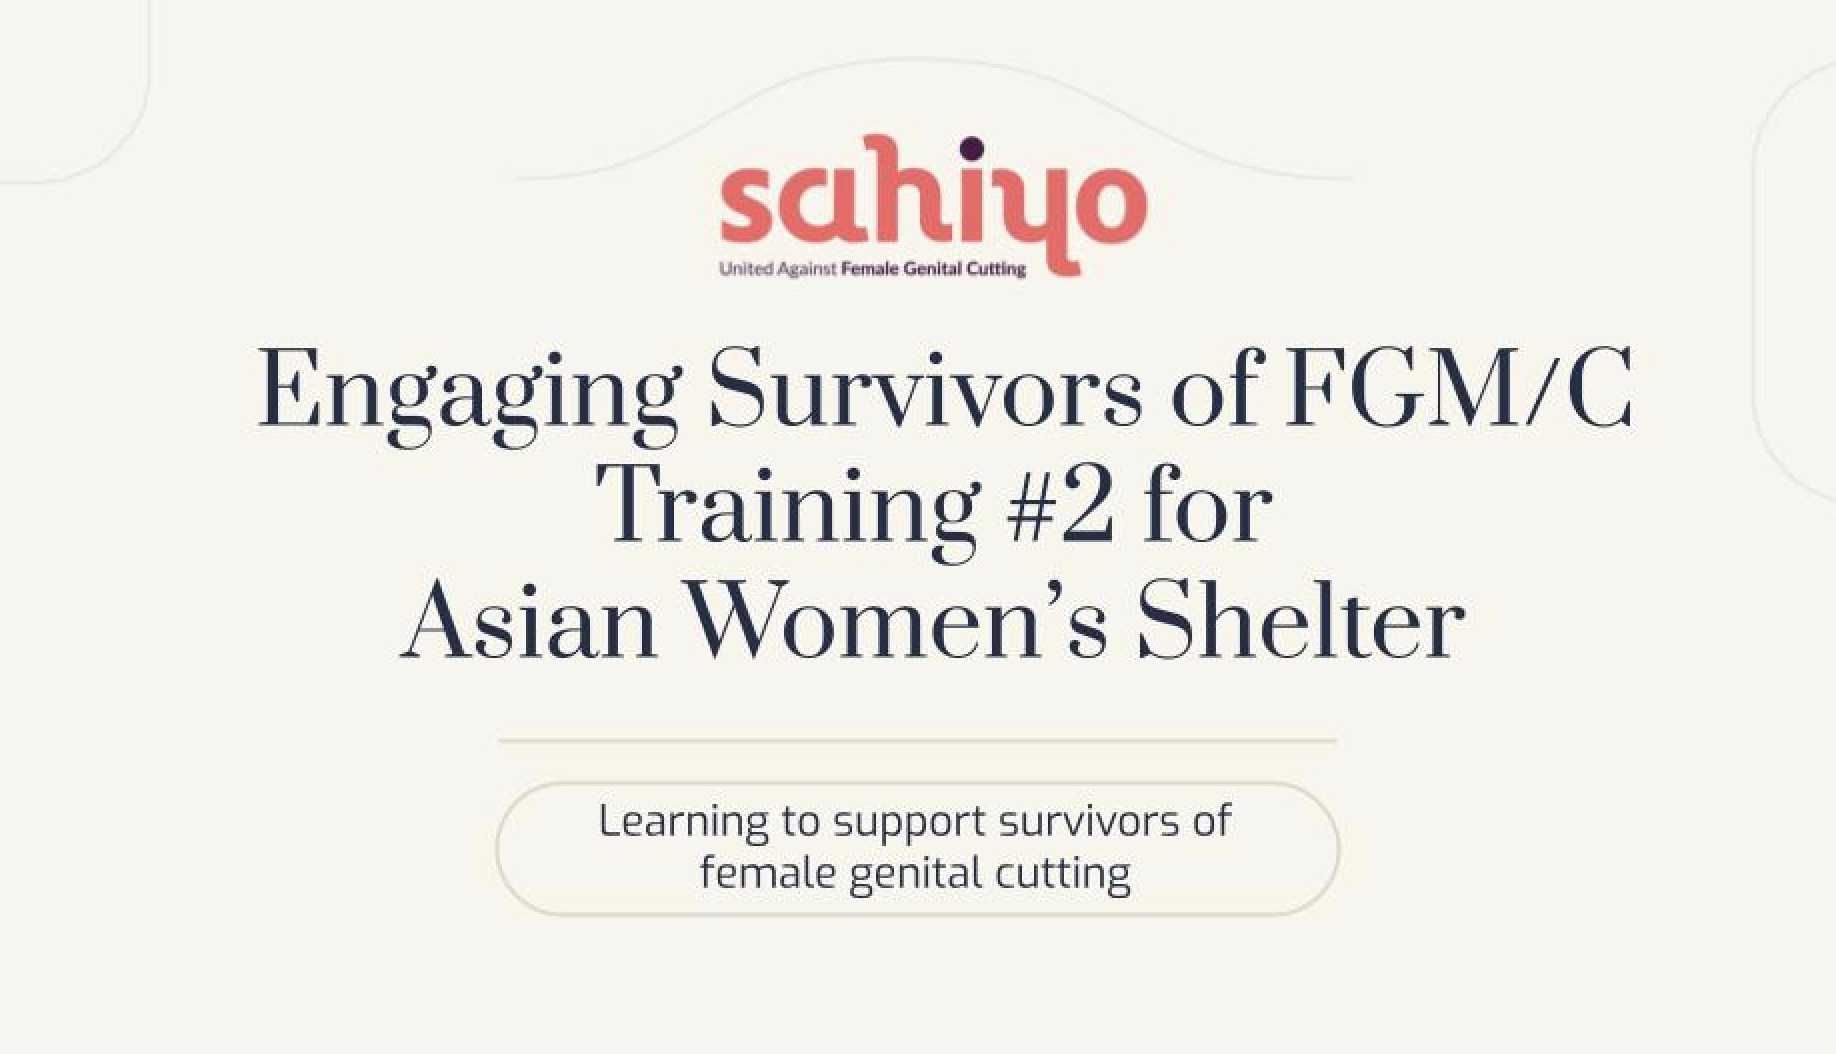 Sahiyo collaborates further with Asian Women’s Shelter to support Survivors 